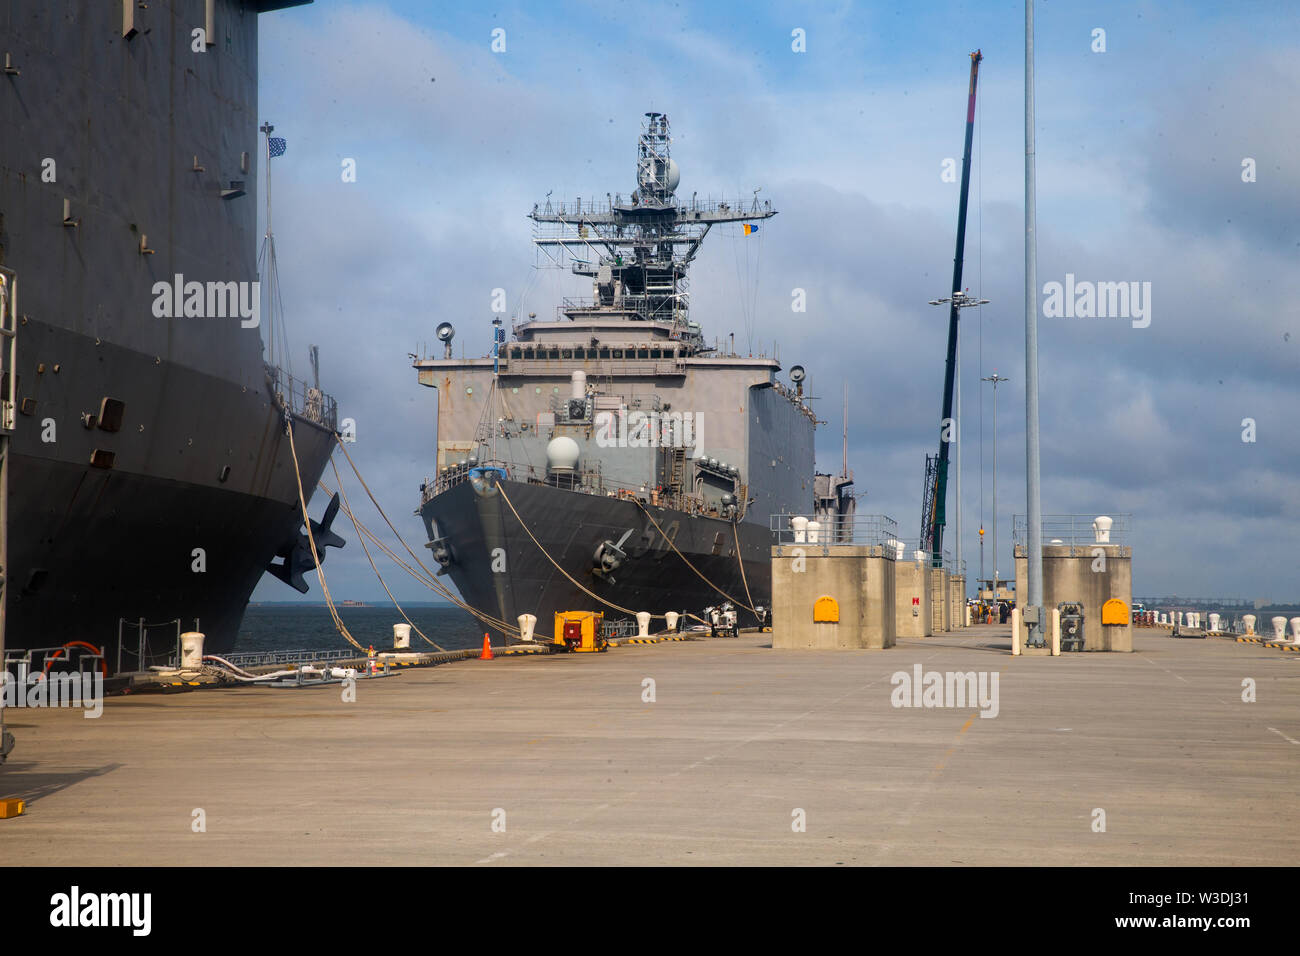 USS Carter Hall (LSD 50) Harpers Ferry Class docks at a pier on Naval Air Station Norfolk, Virginia, July 12, 2019. U.S. Marines with II Marine Expeditionary Force rehearsed a loading exercise with the U.S. Navy to rapidly form, embark and deploy maritime Defense Support for Civil Authorities operations in support of U.S. Northern Command. (U.S. Marine Corps photo by Lance Cpl. Adaezia Chavez) Stock Photo